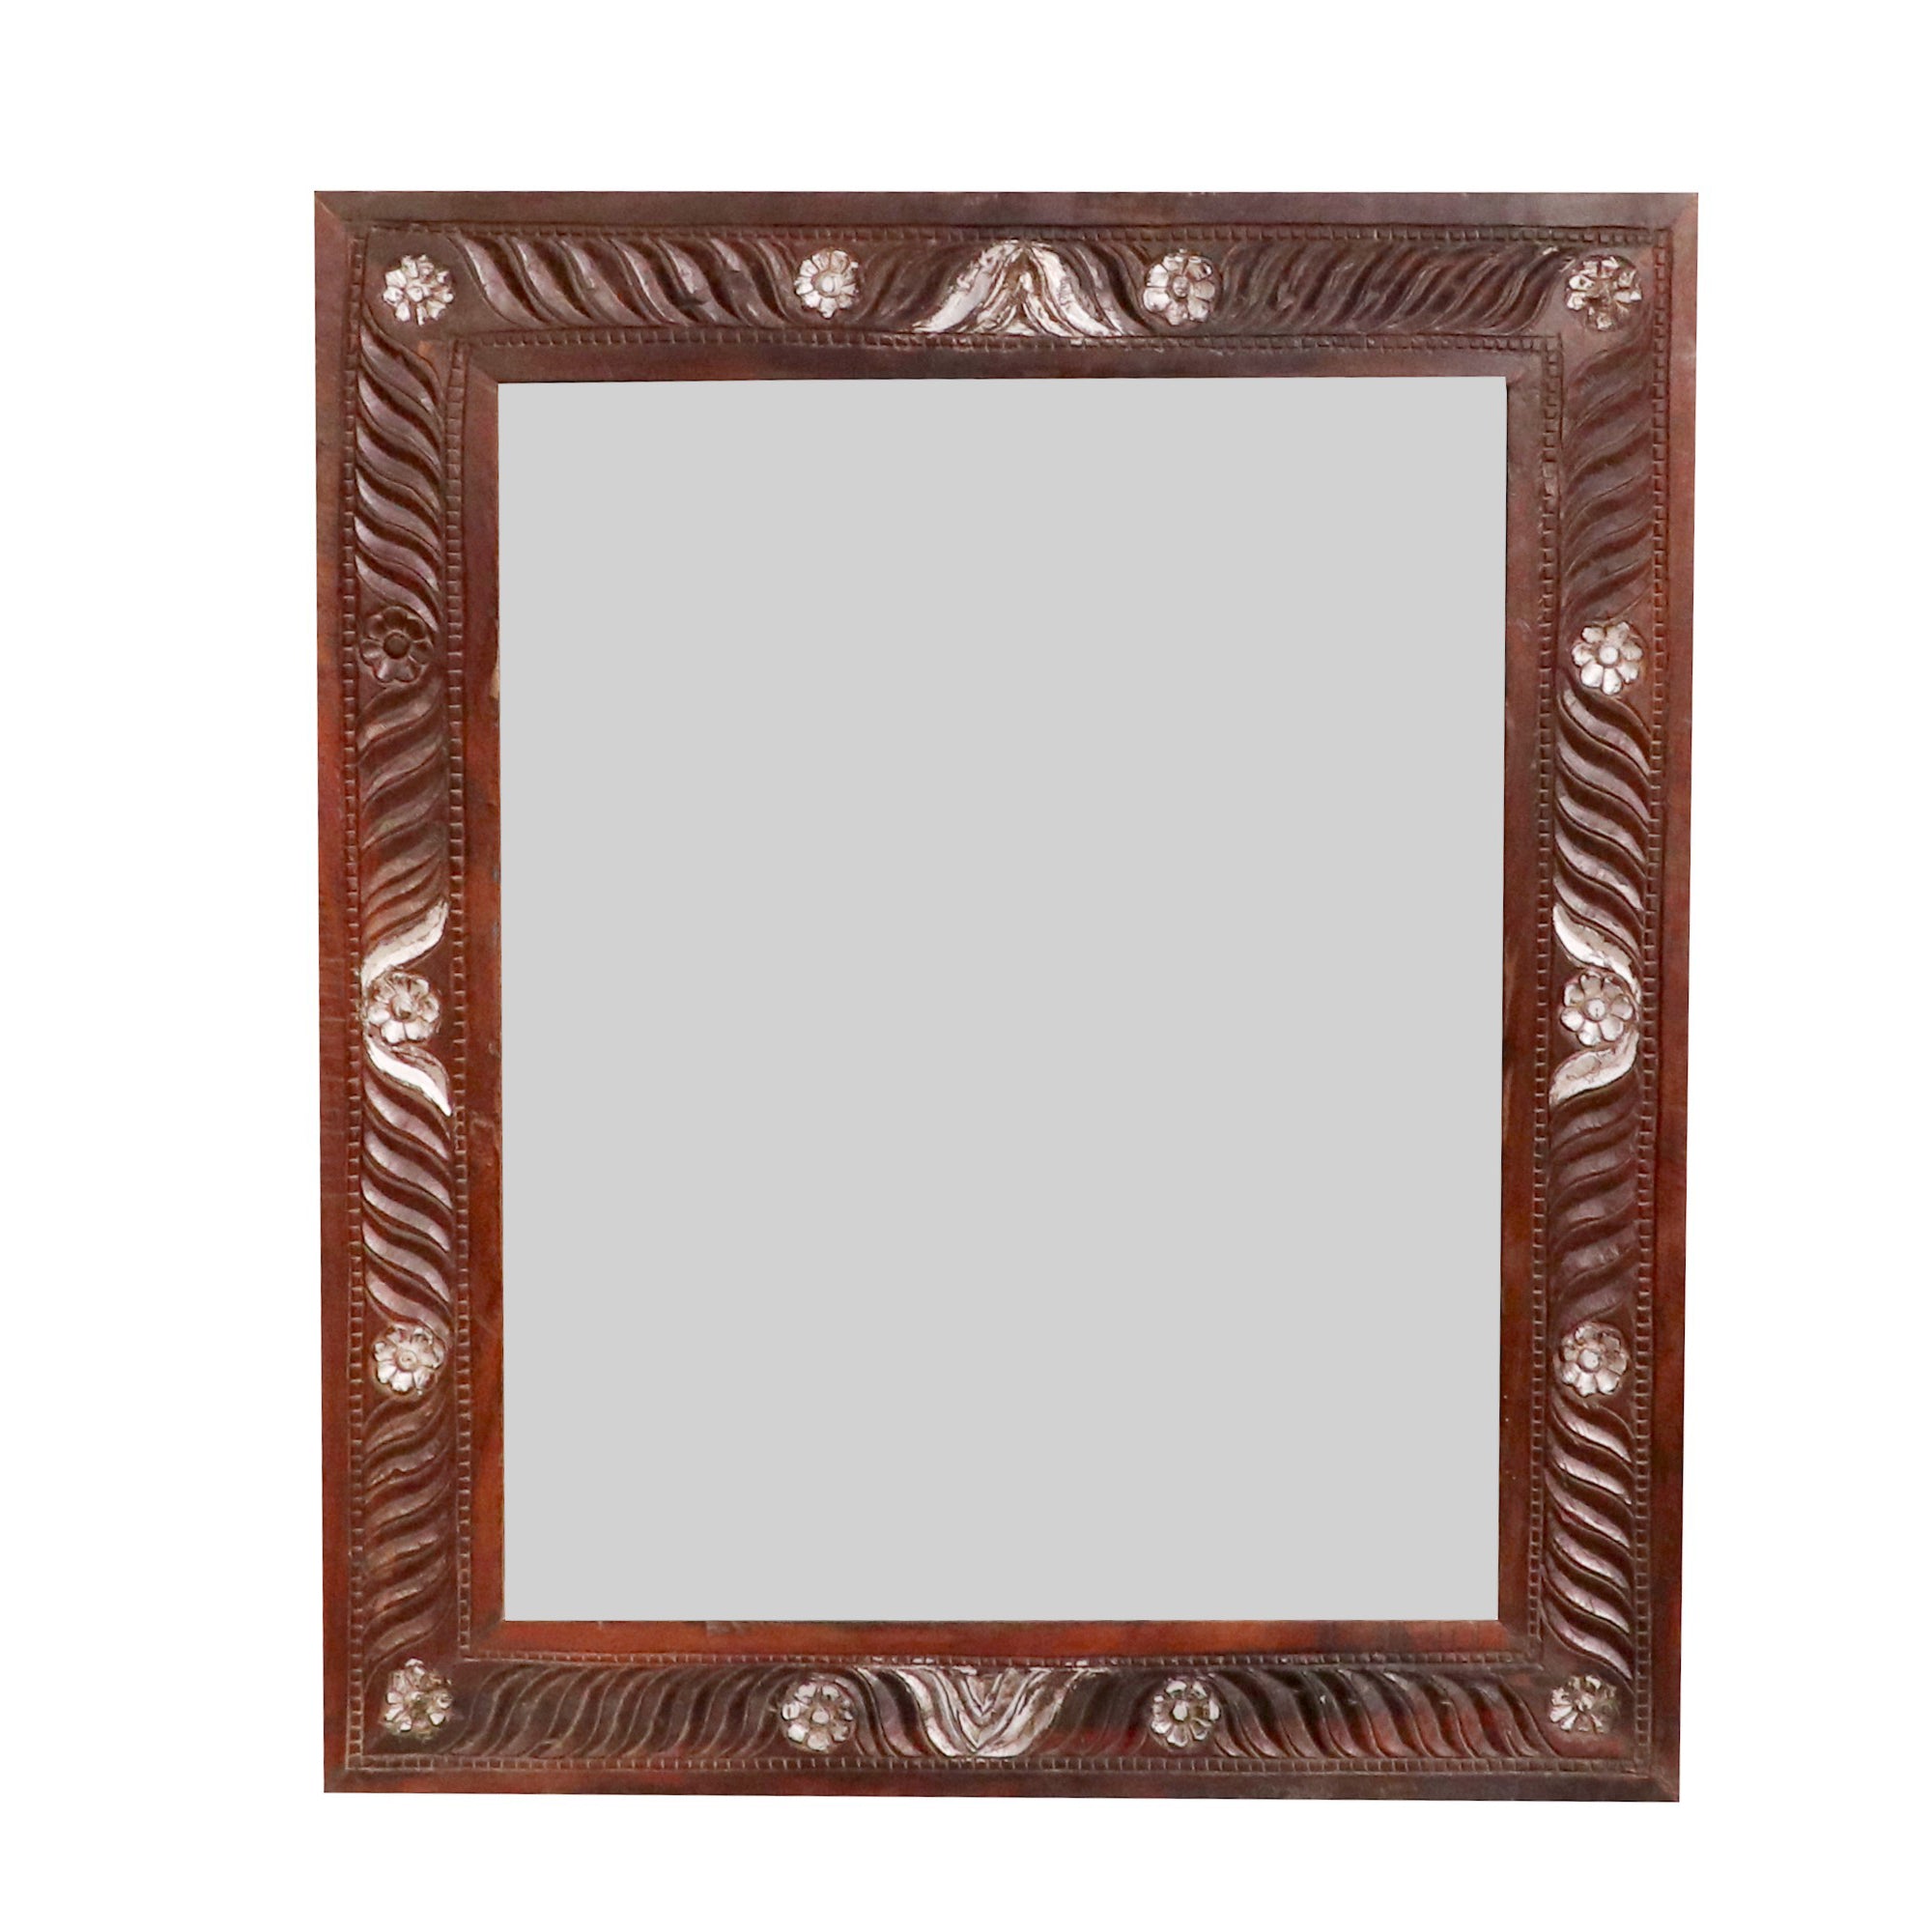 Crawling wood Solid mirror with 4 side white distressed petals Mirror